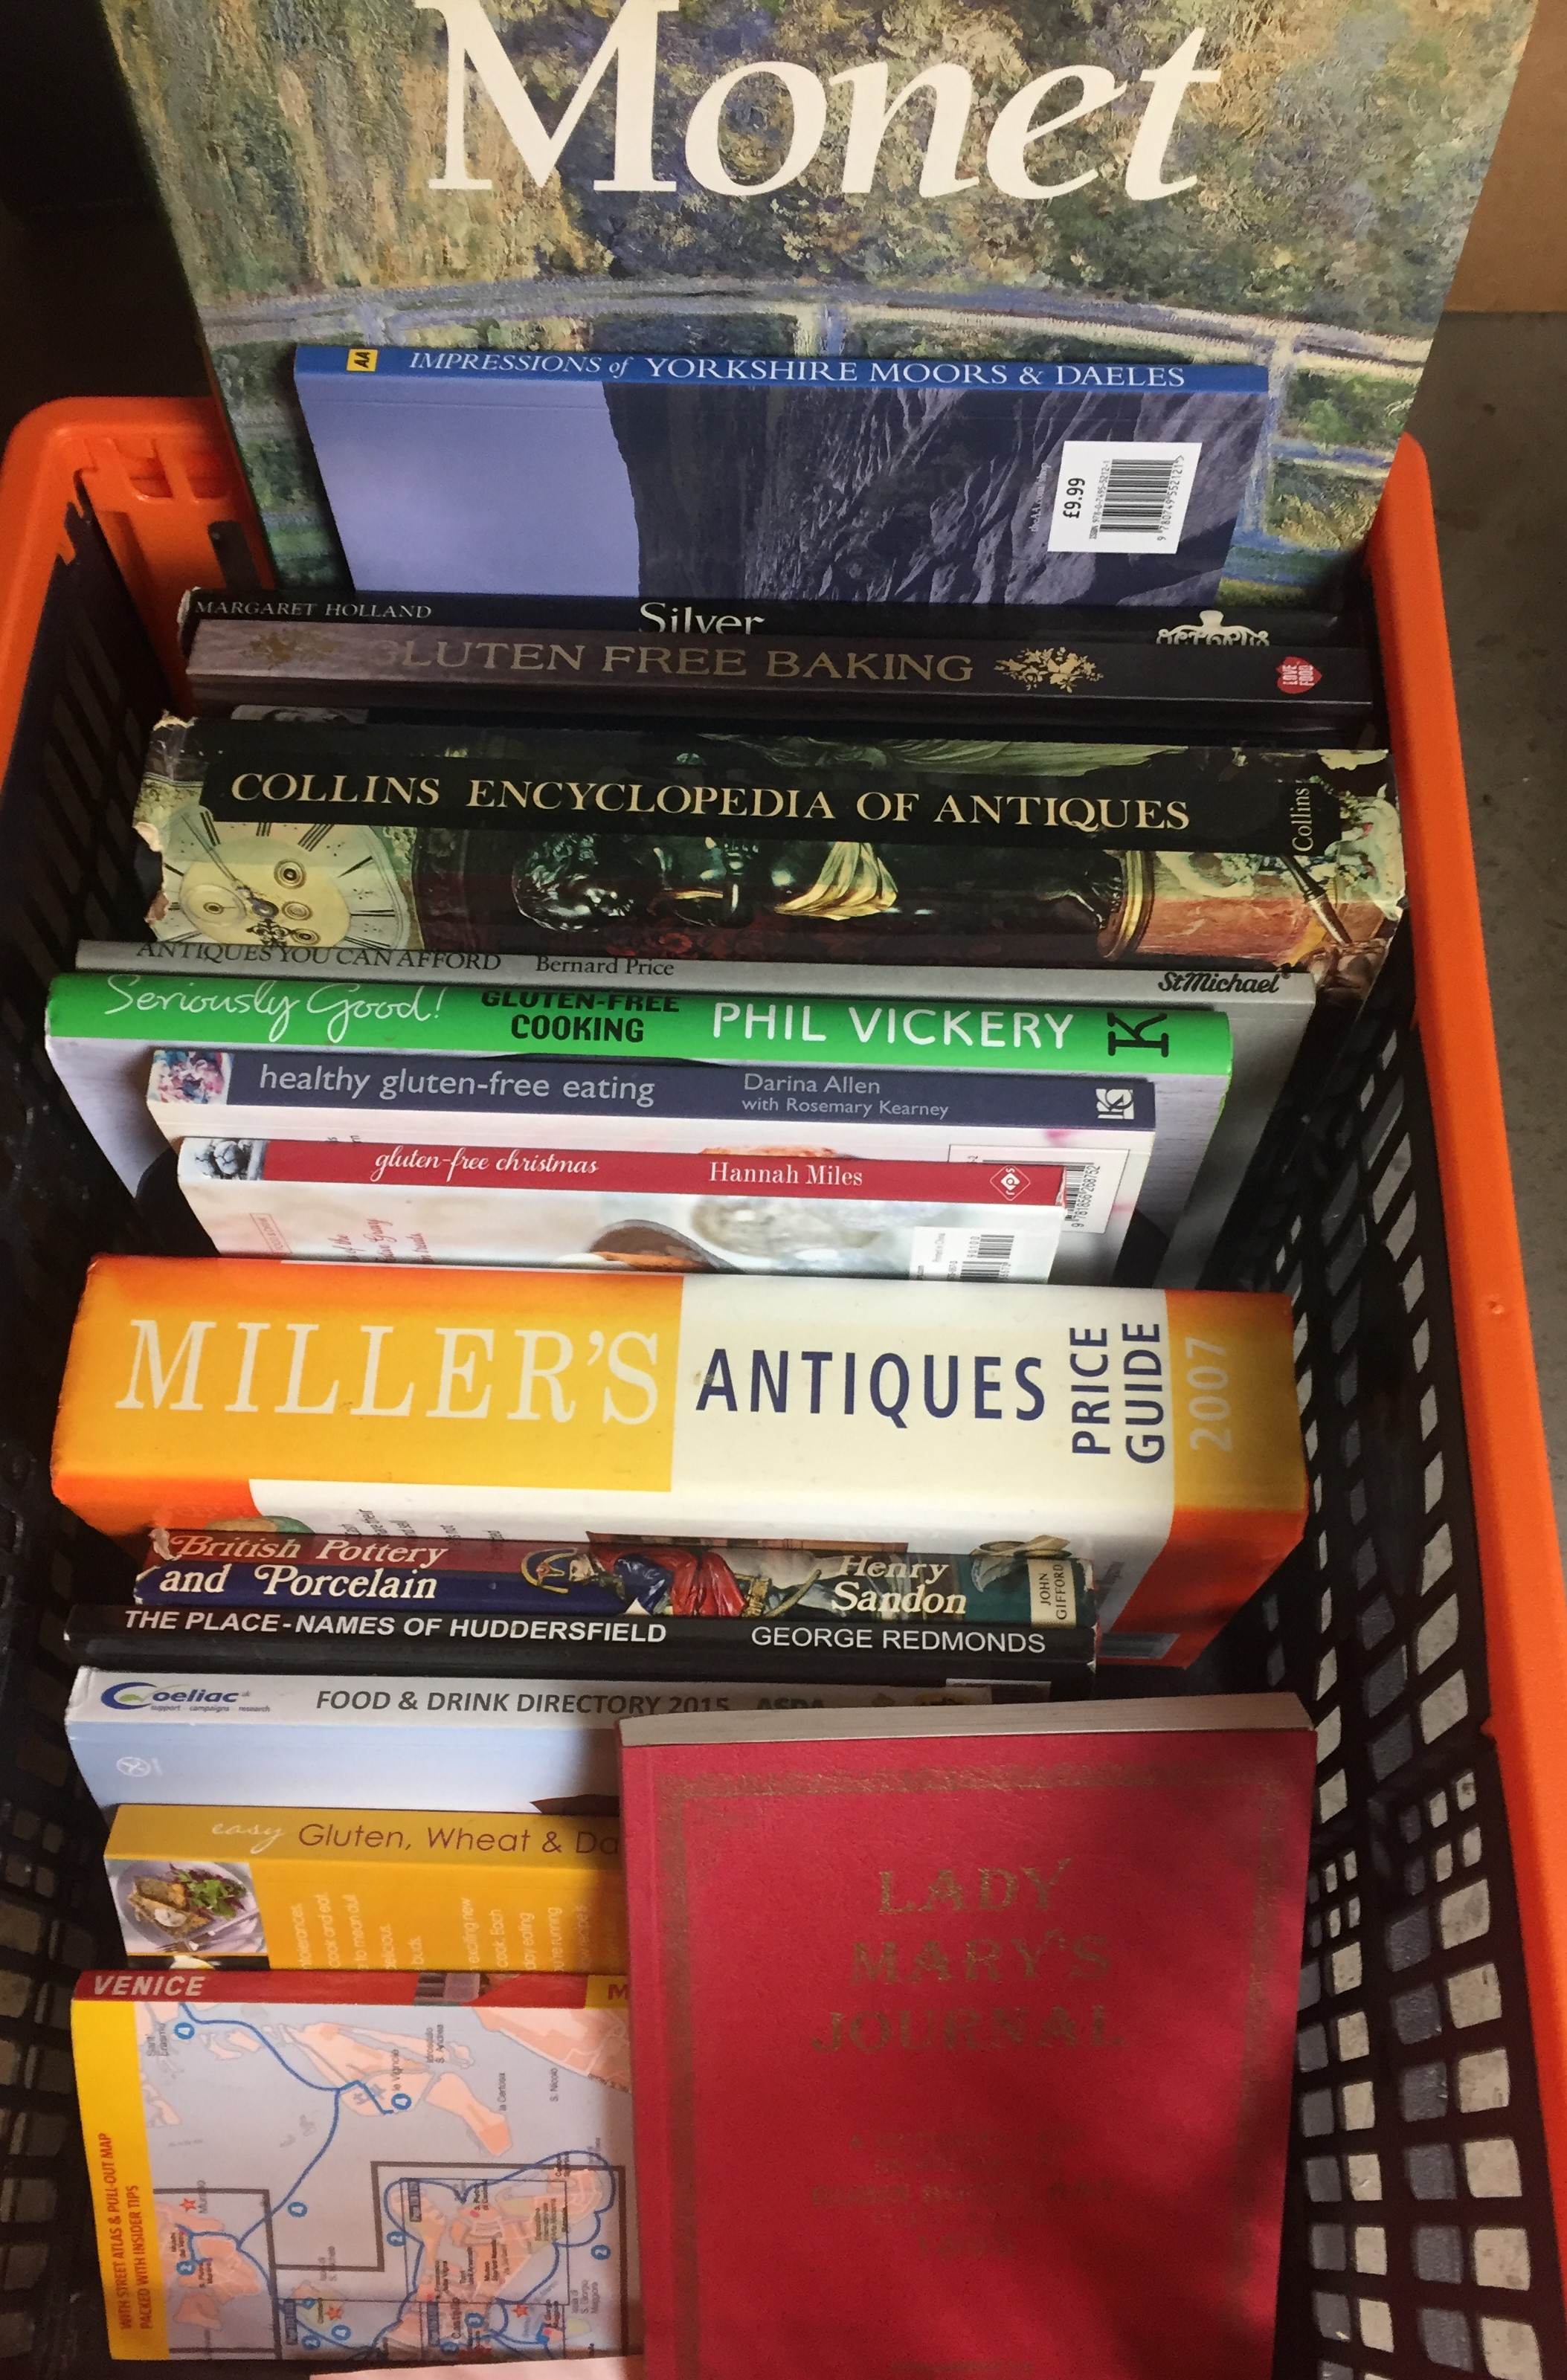 Contents to orange plastic crate - seventeen books including Lady Mary's Journal Victorian Lady in